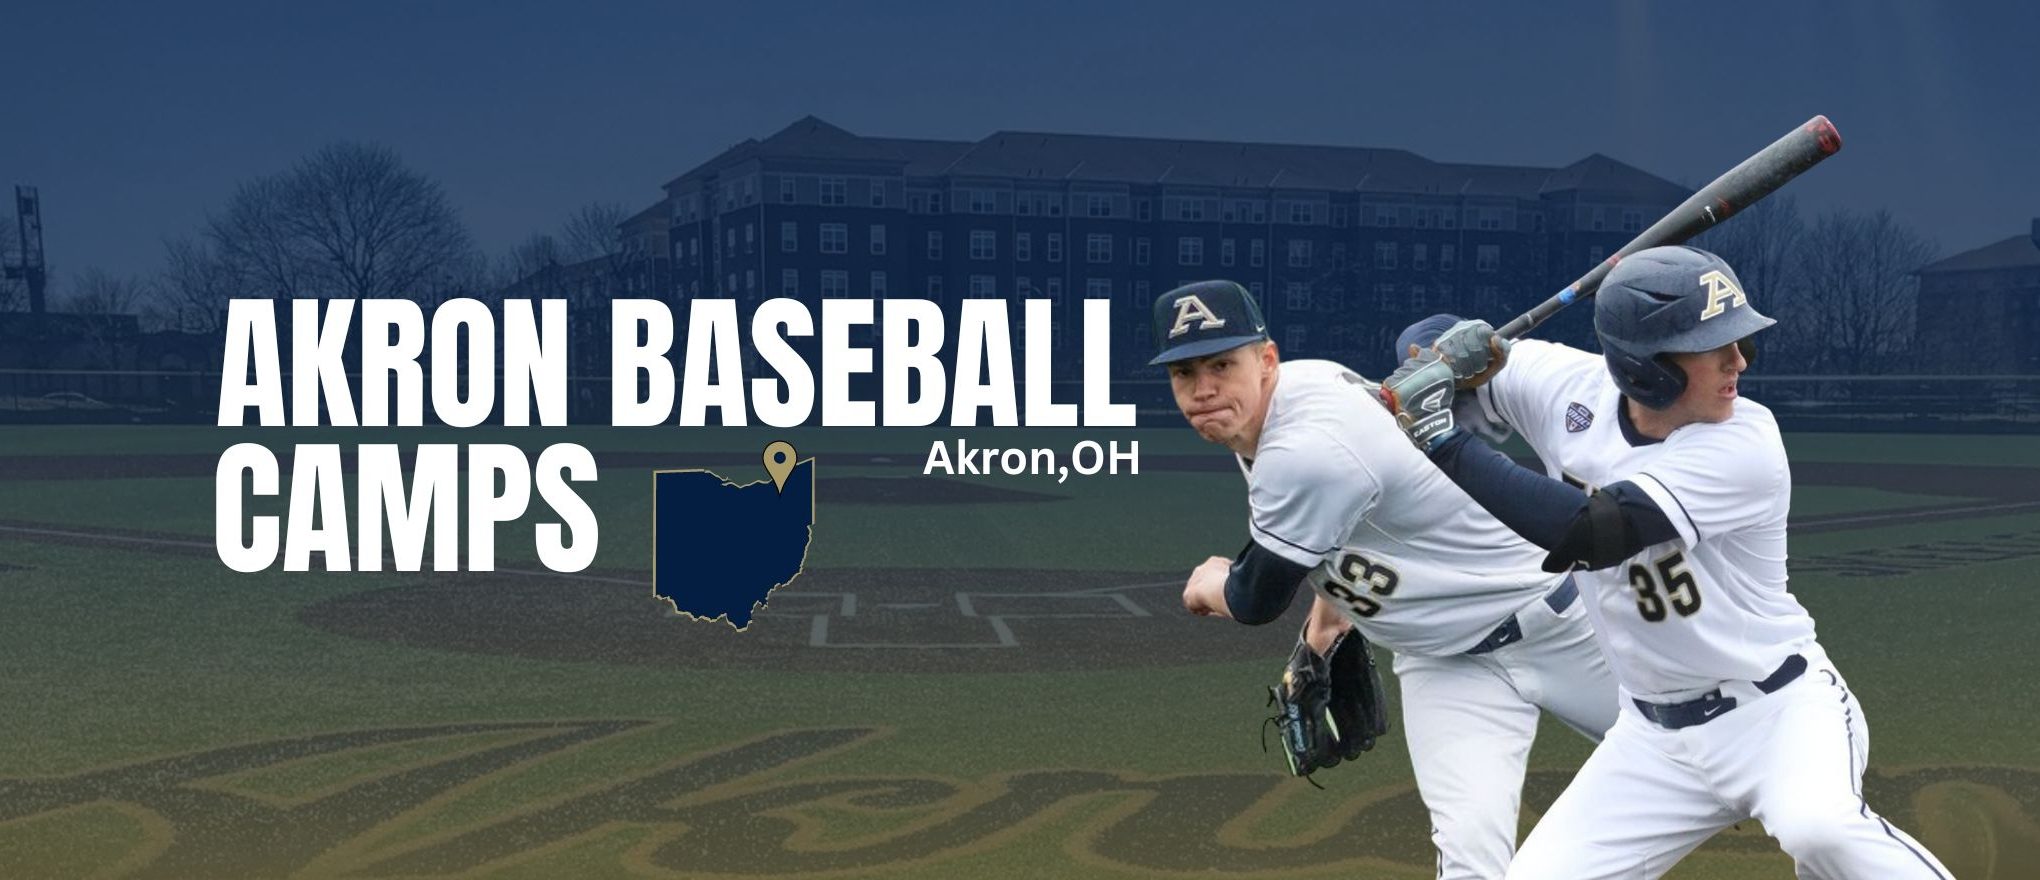 Akron Baseball Camps Ohio Youth and Prospect Camps